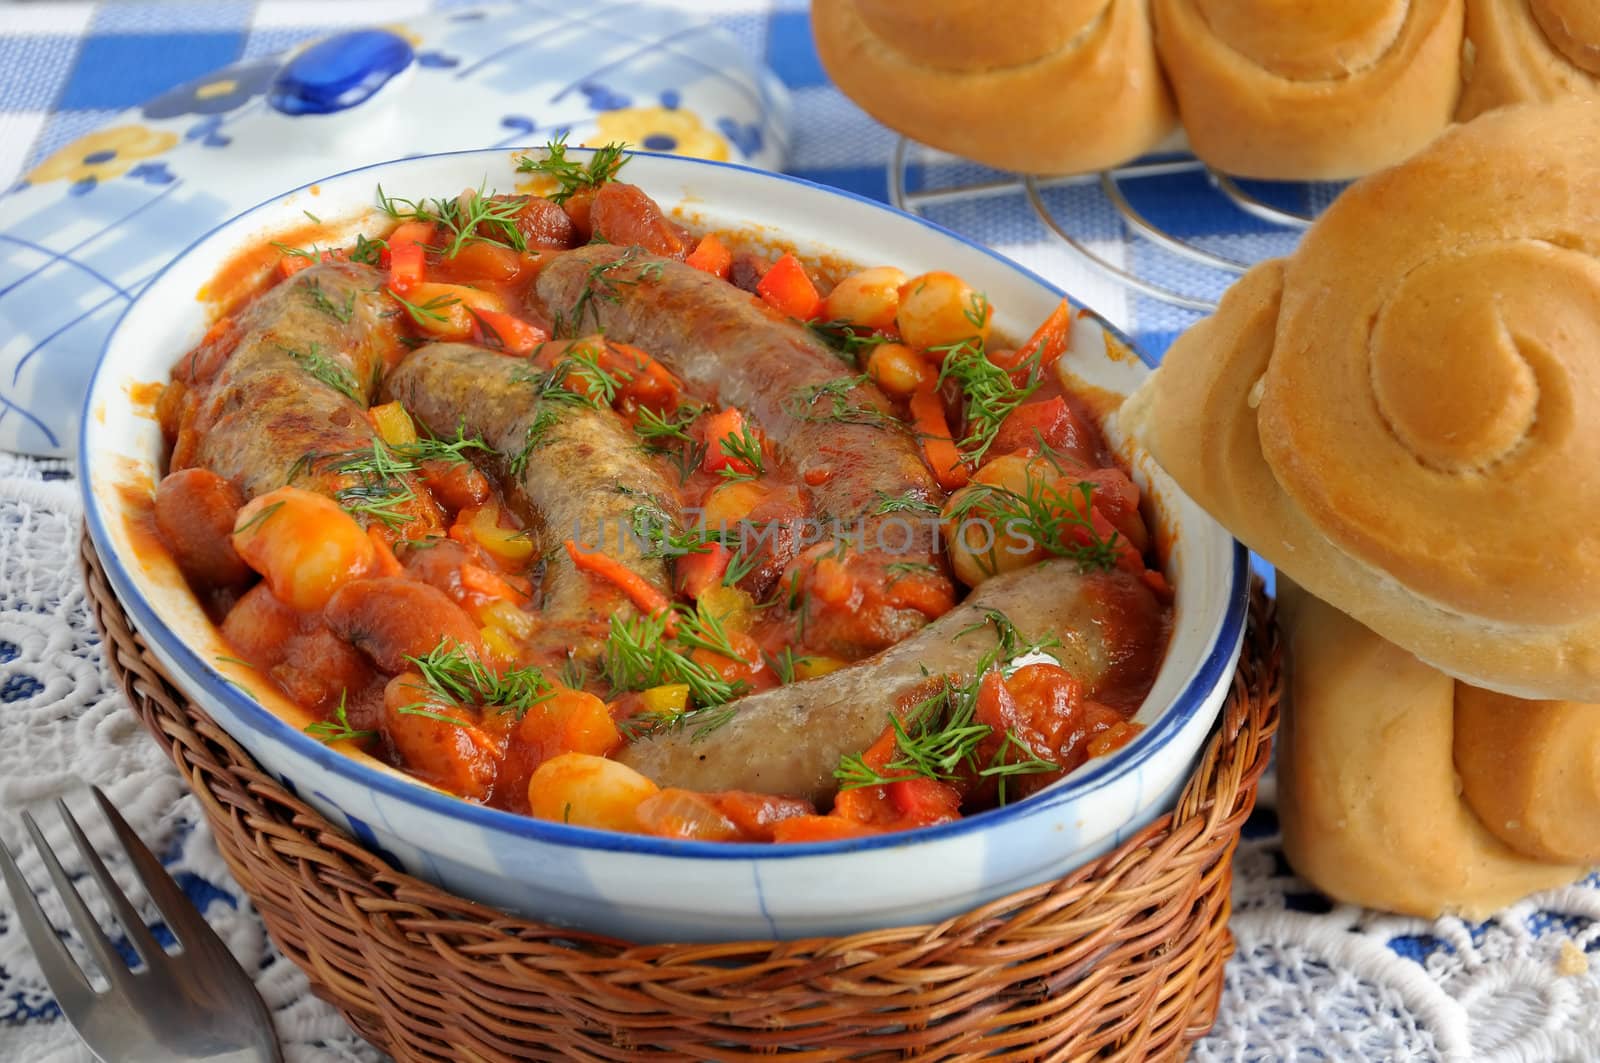 Home sausage with beans, onions and carrots in a tomato sauce